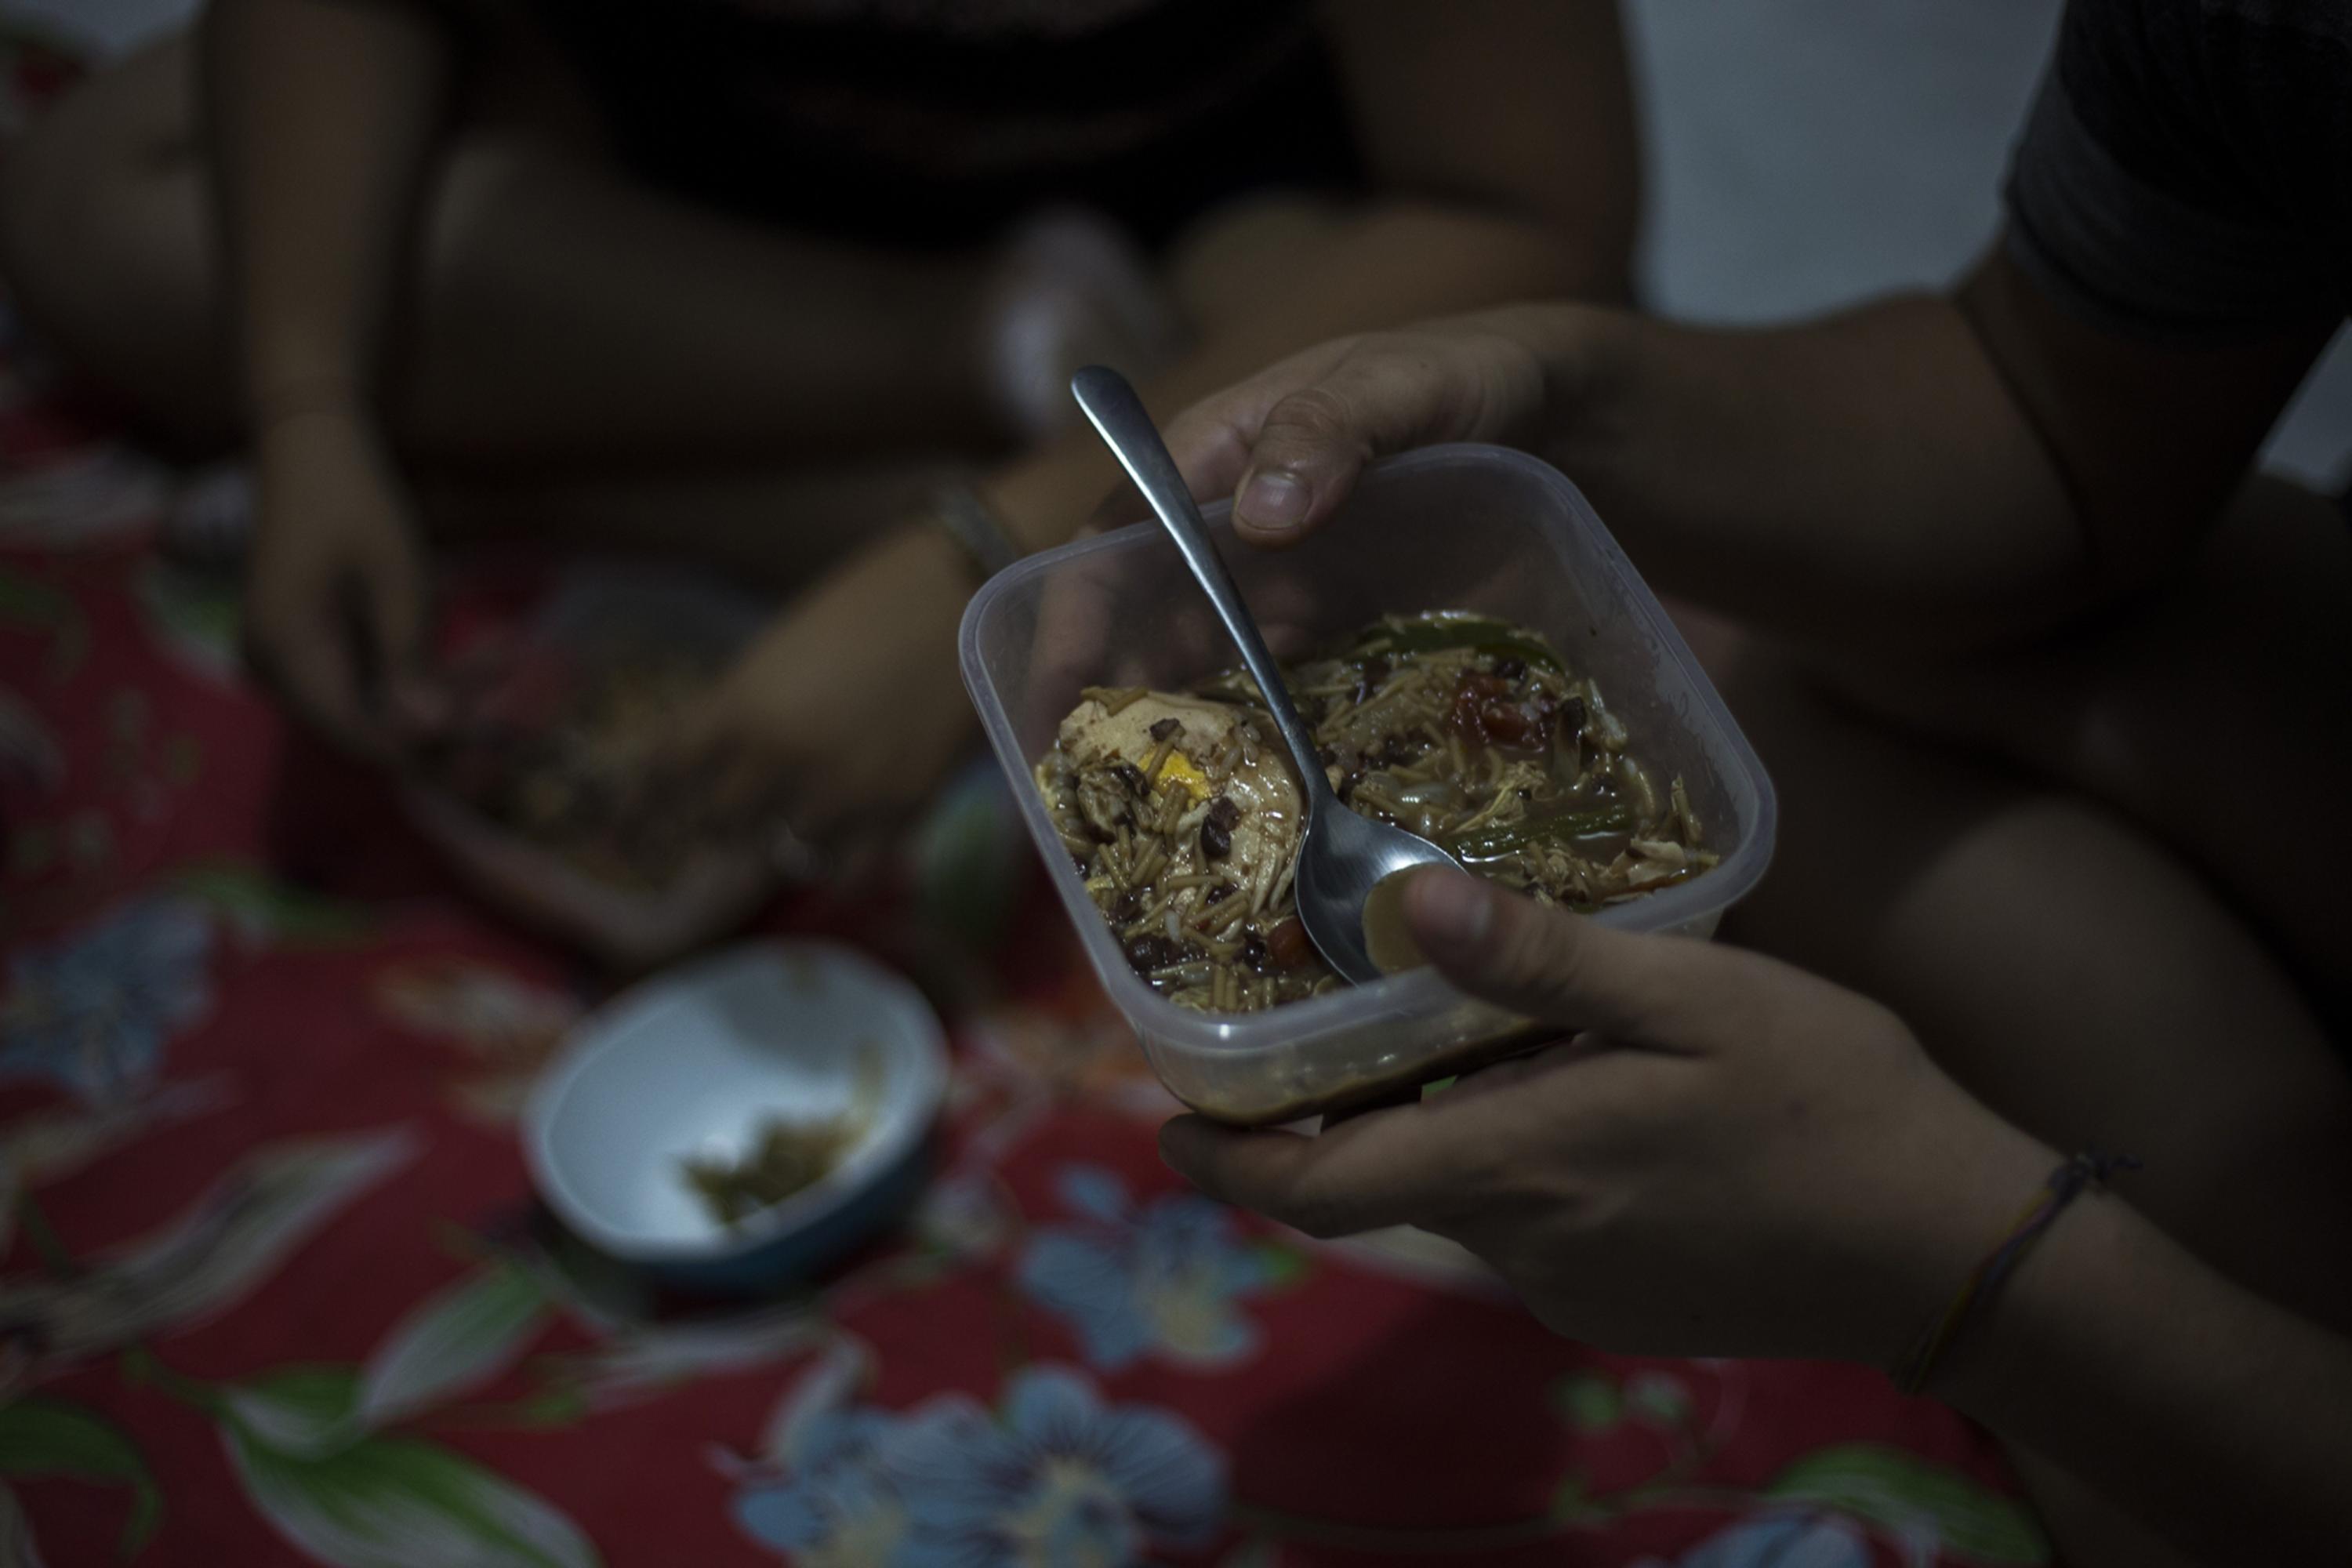 In a safe house on the outskirts of Managua, four youths share a meager meal of bean soup, noodles, and vegetables. By October 2018, the young people who took to the streets and occupied universities from April to June, clashing with state security forces and paramilitaries, had either been abducted or gone into hiding. Photo Víctor Peña